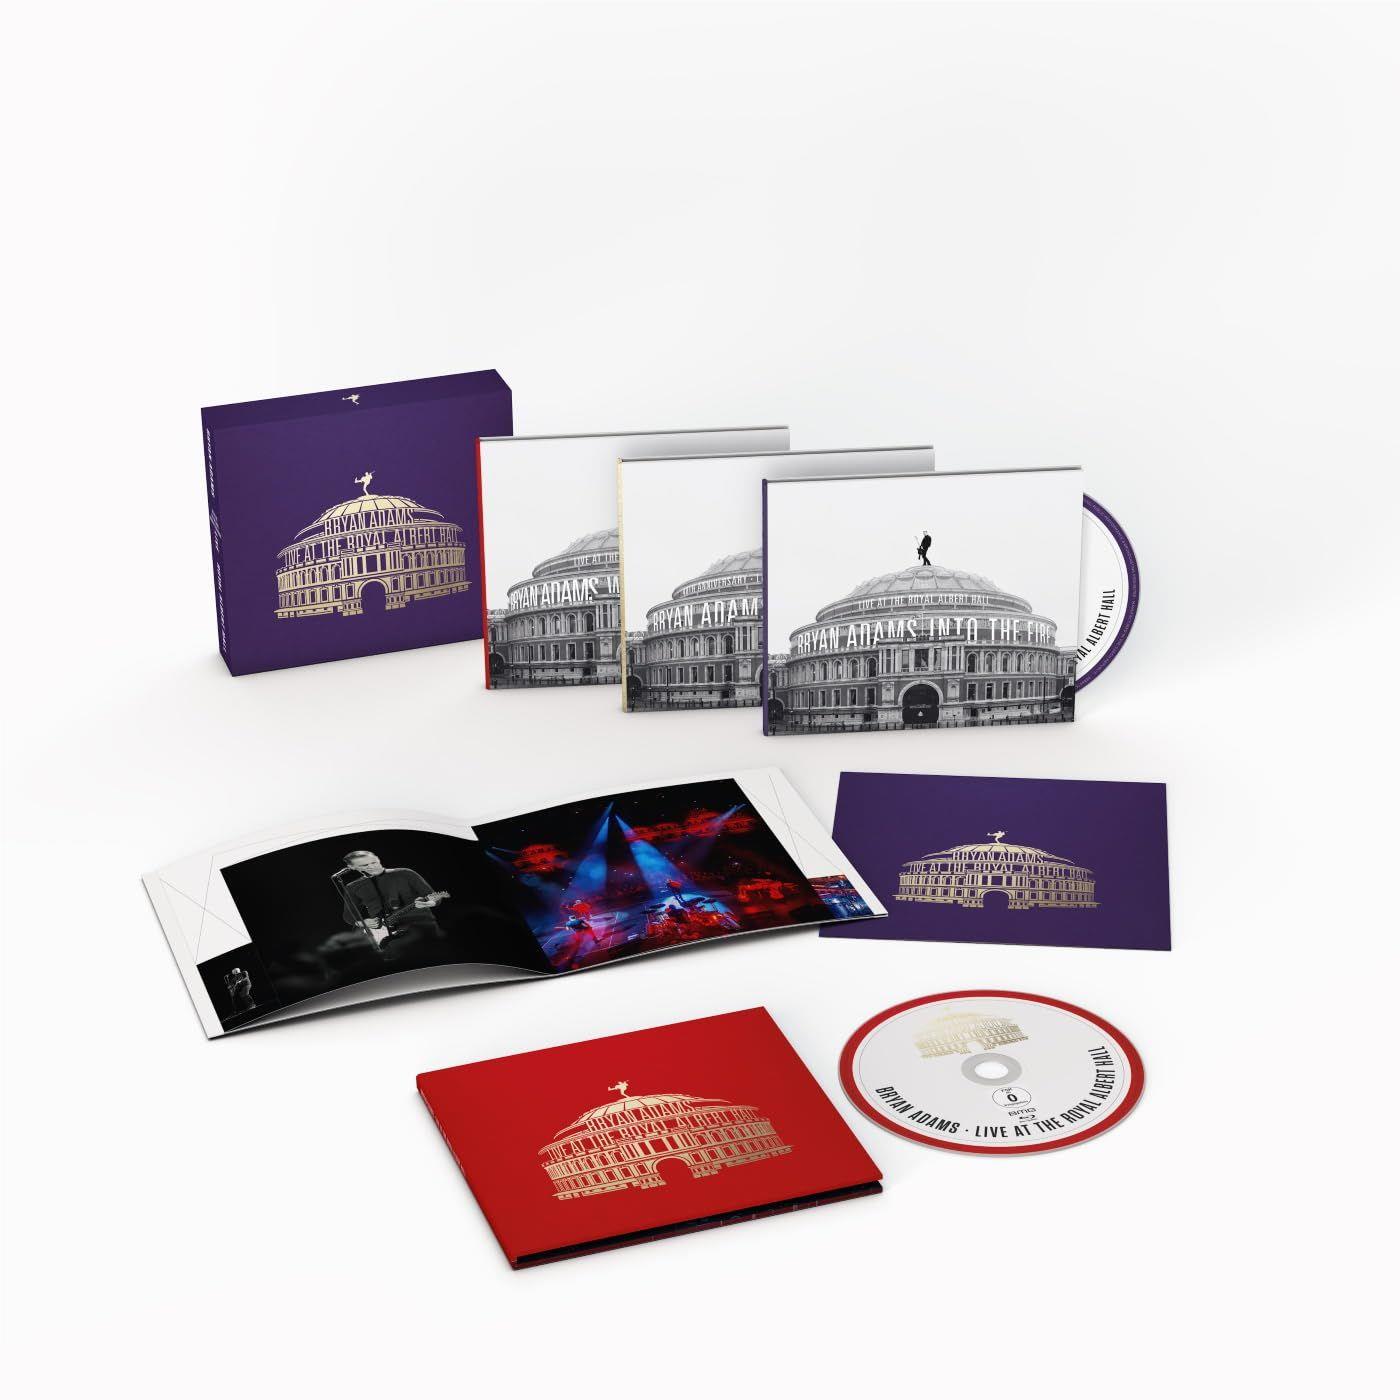 live at the royal albert hall (deluxe edition)